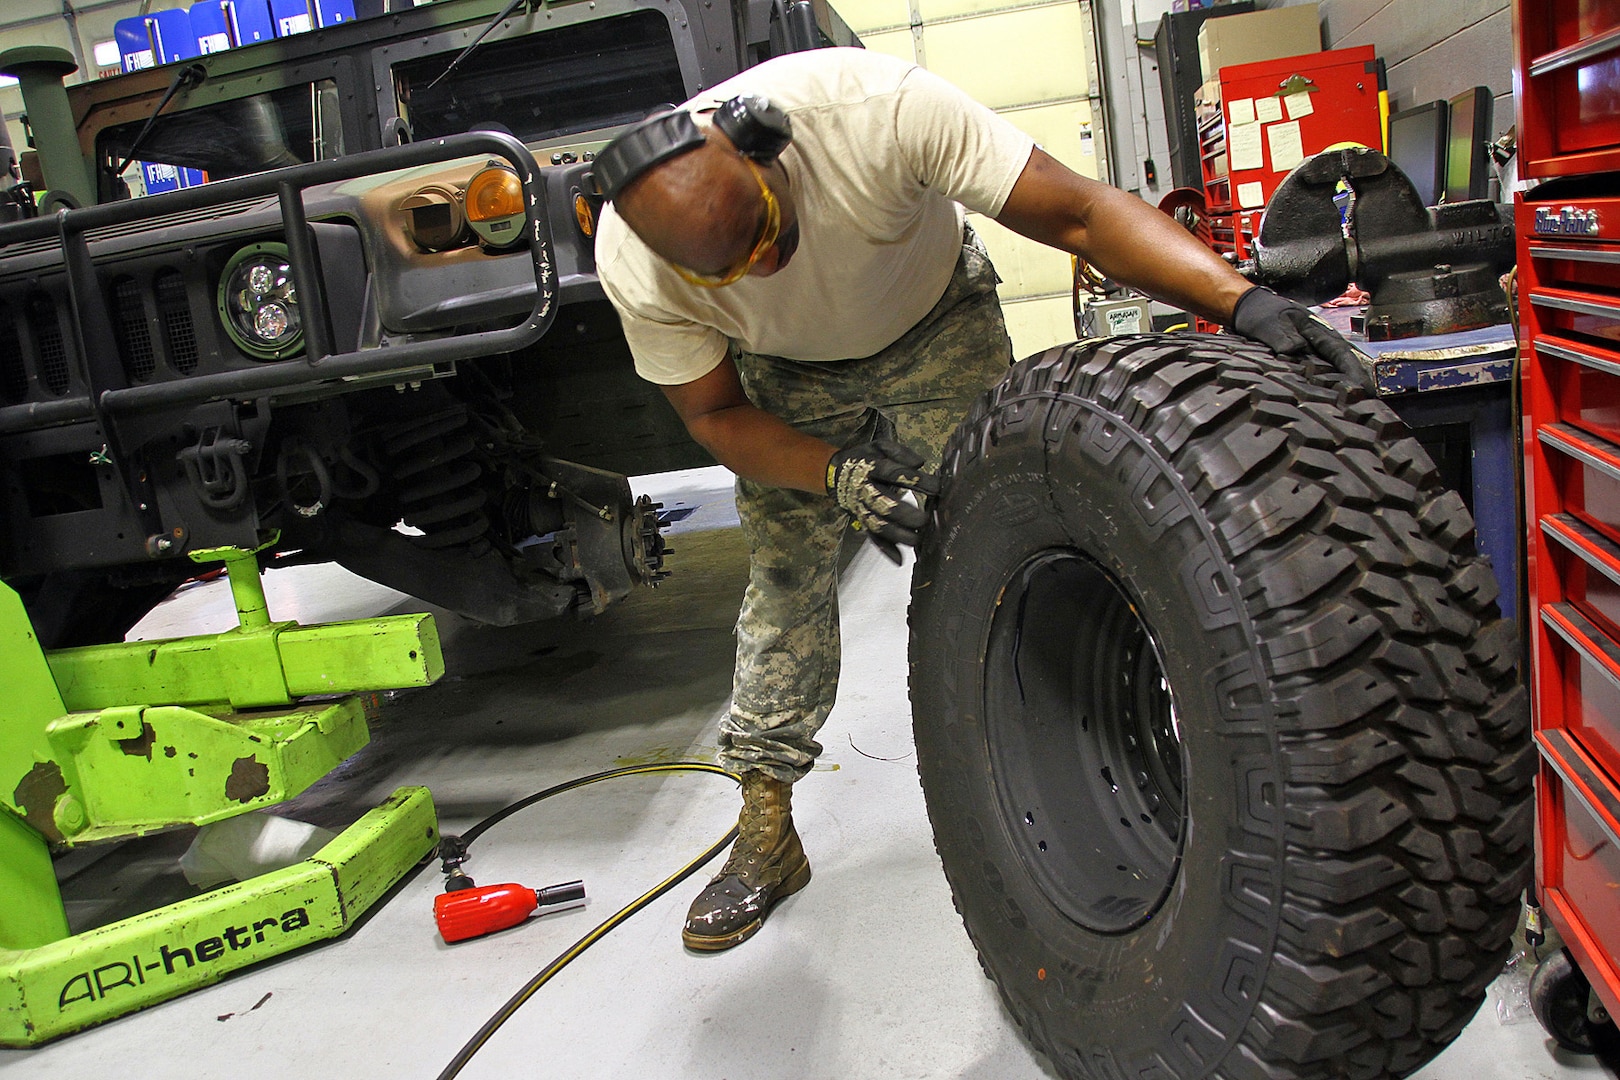 Sgt. Rudon Gay inspects a tire prior to installation on a Humvee at Field maintenance Shop #5 in Frankfort, Ky., Aug 17, 2018. More than 1,200 tires were considered damaged and replaced on Kentucky Guard vehicles after a defect was discovered in the Spring of 2018.